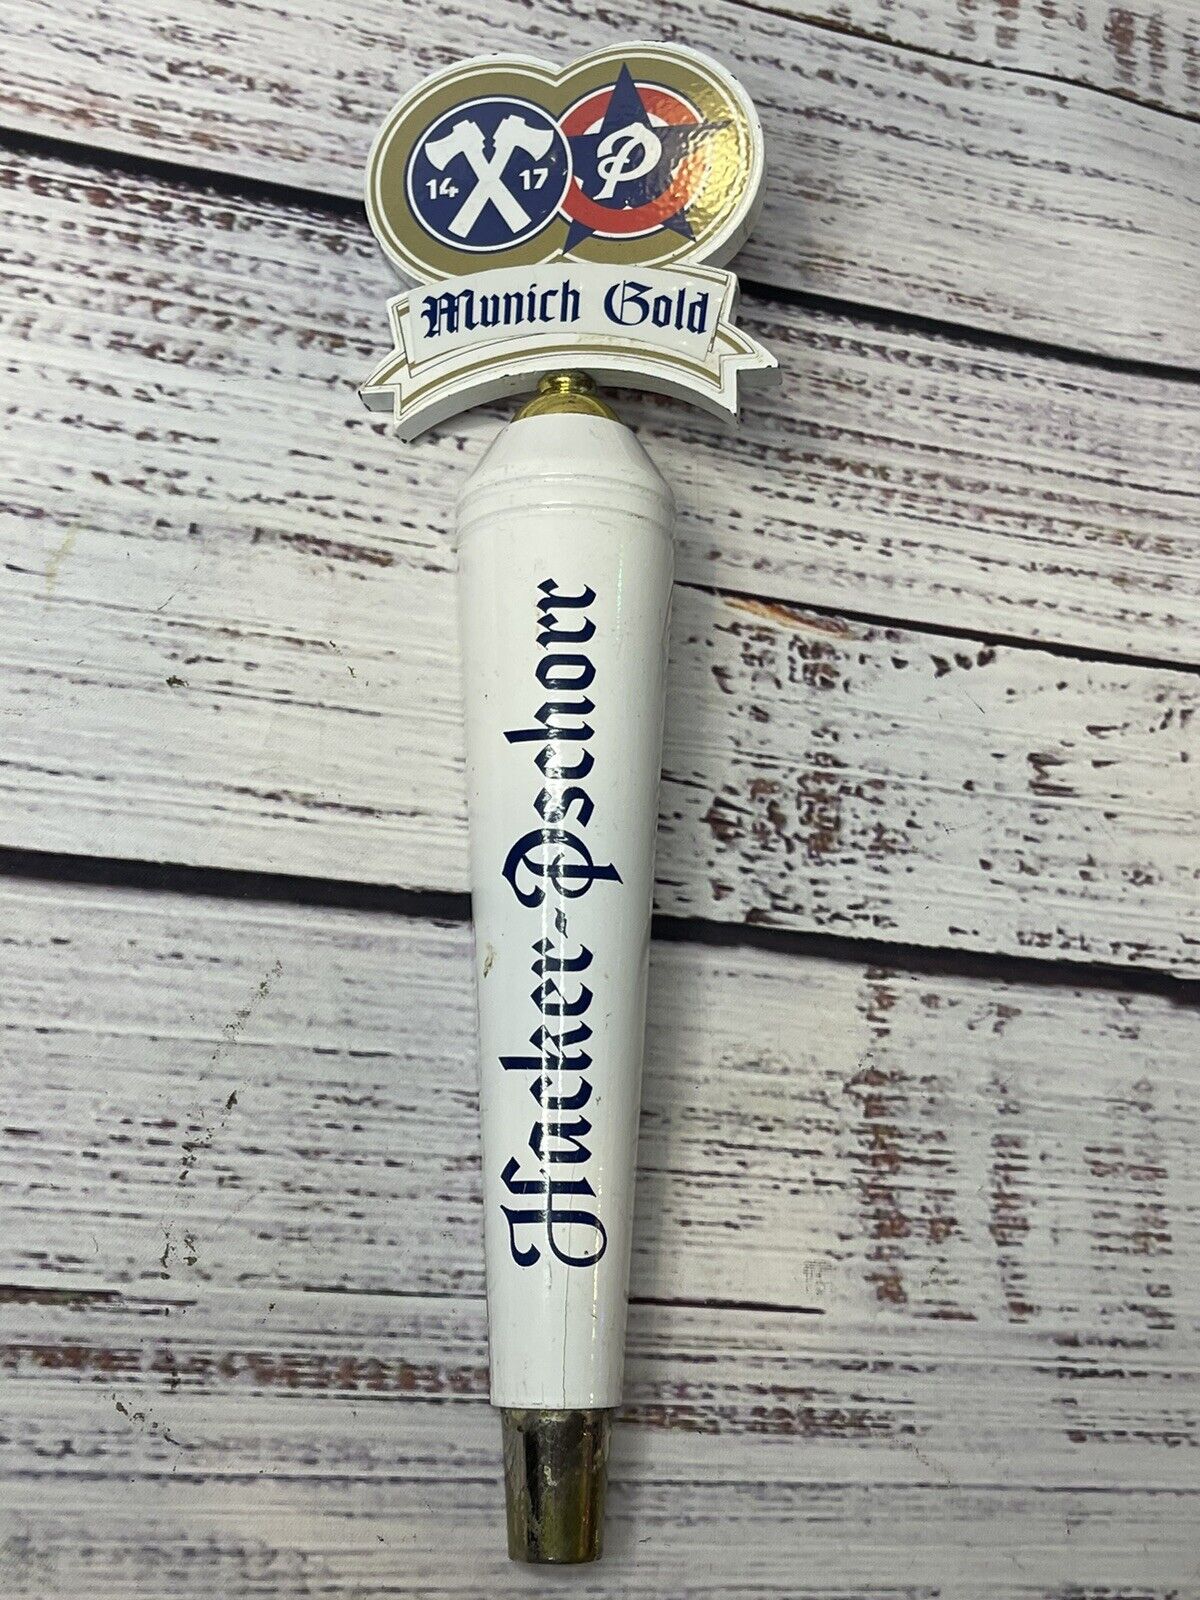 Hacker Pschorr Beer Tap Handle Munich Gold Germany Brewery